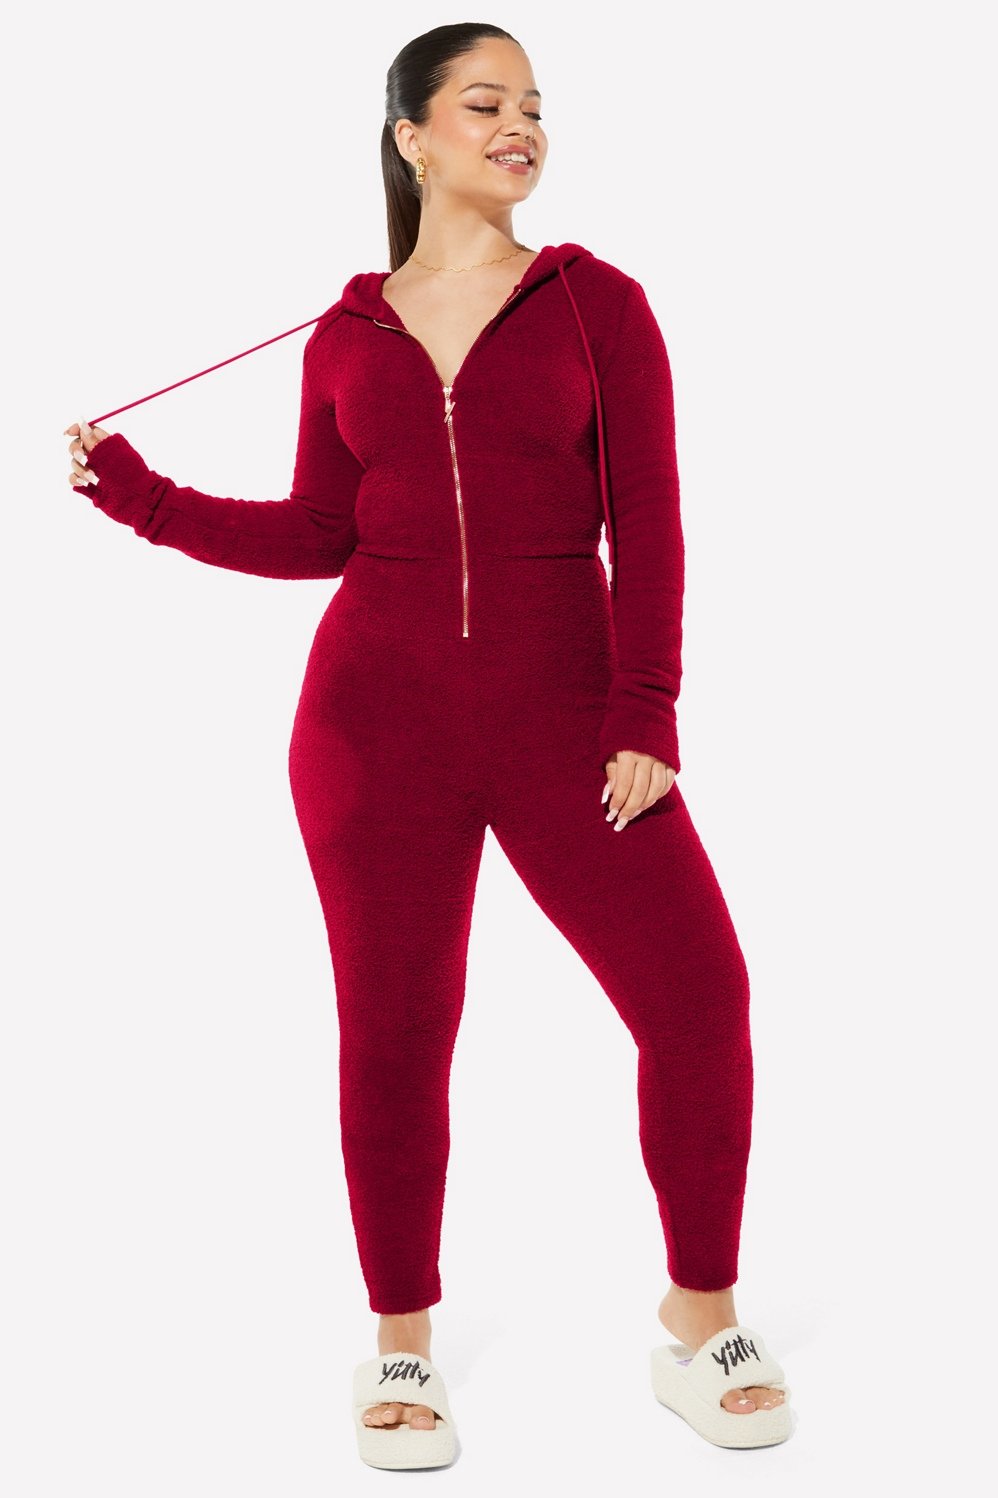 YITTY on X: ❤️‍🔥 The Pet Me Heart Pocket Onesie ❤️‍🔥 Snatched in a onesie?!  Yup. We do originality. This one-and-done baddie serves soft and cozy with  sexy vibes. Put a little